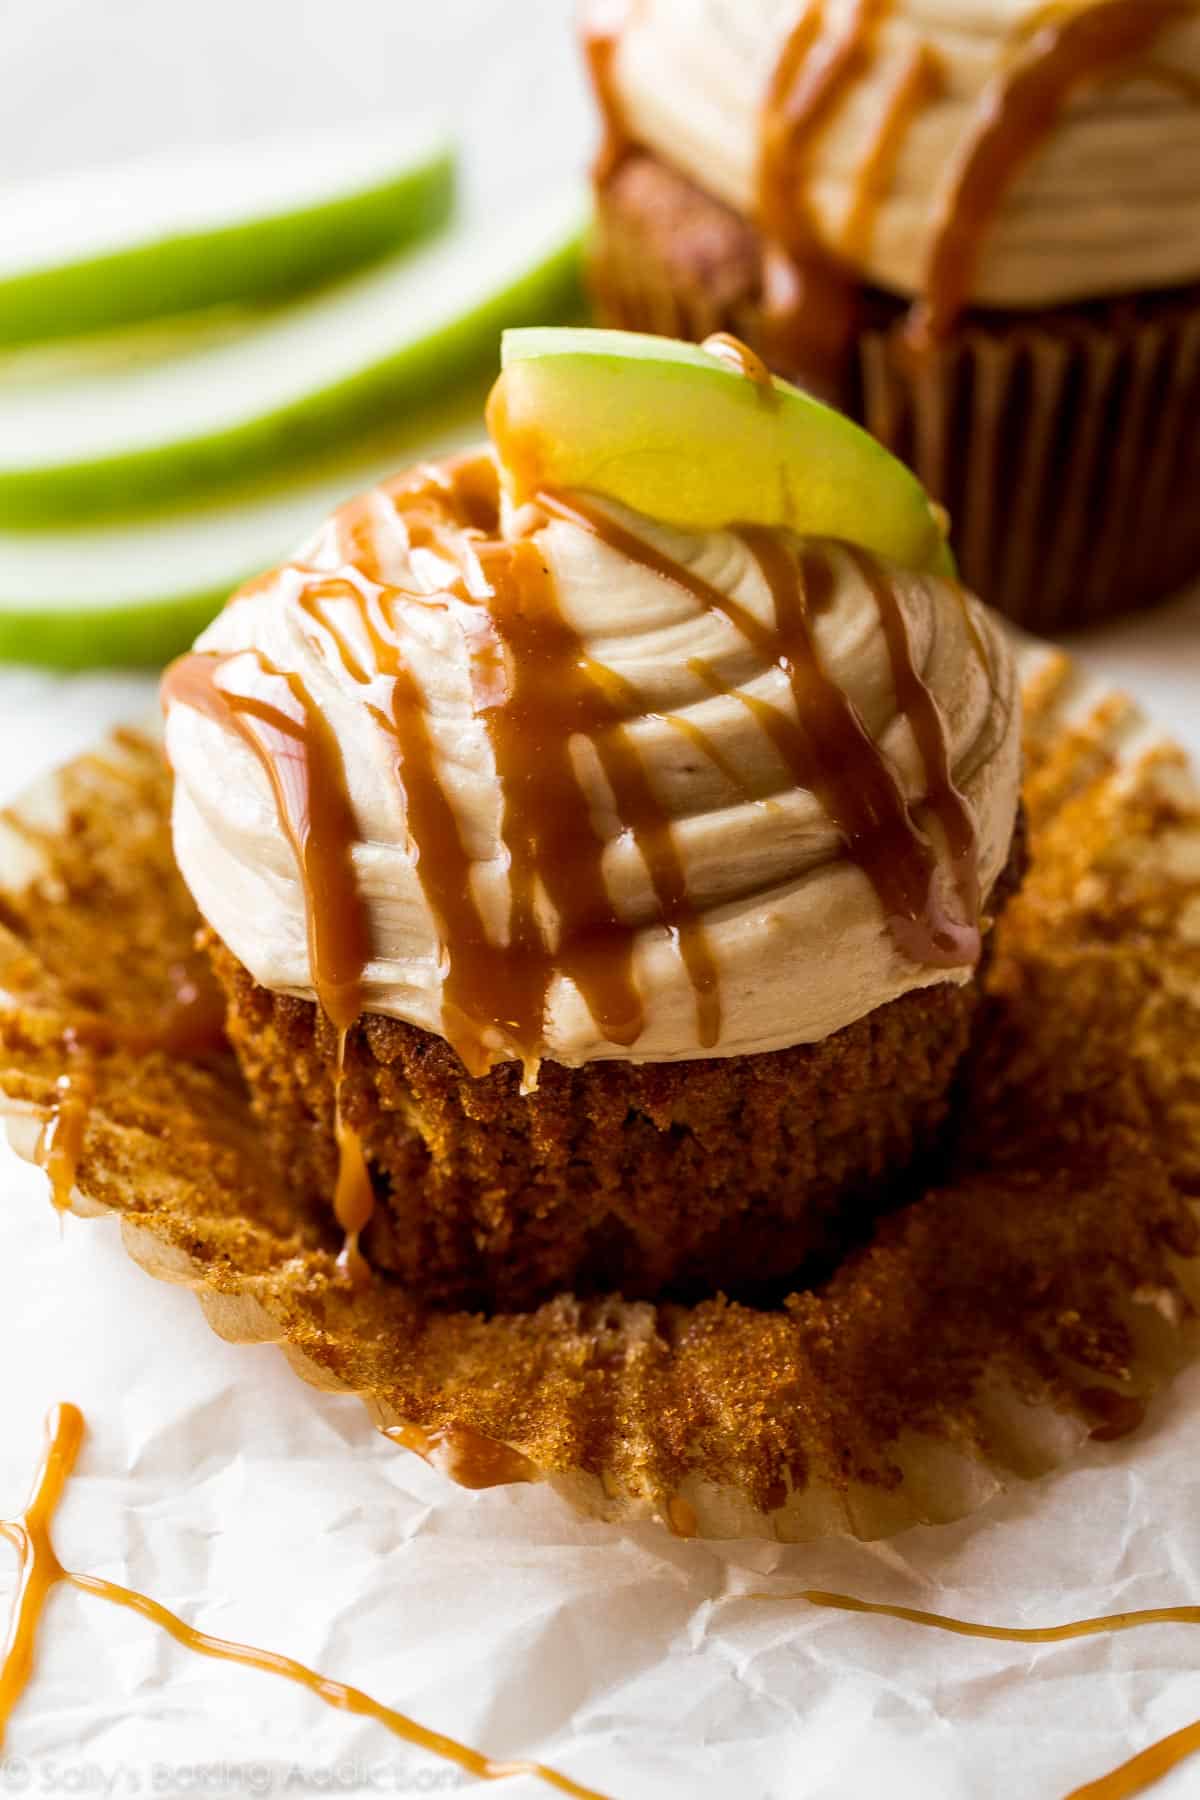 apple spice cupcake with salted caramel frosting, a drizzle of salted caramel, and a slice of granny smith apple on top